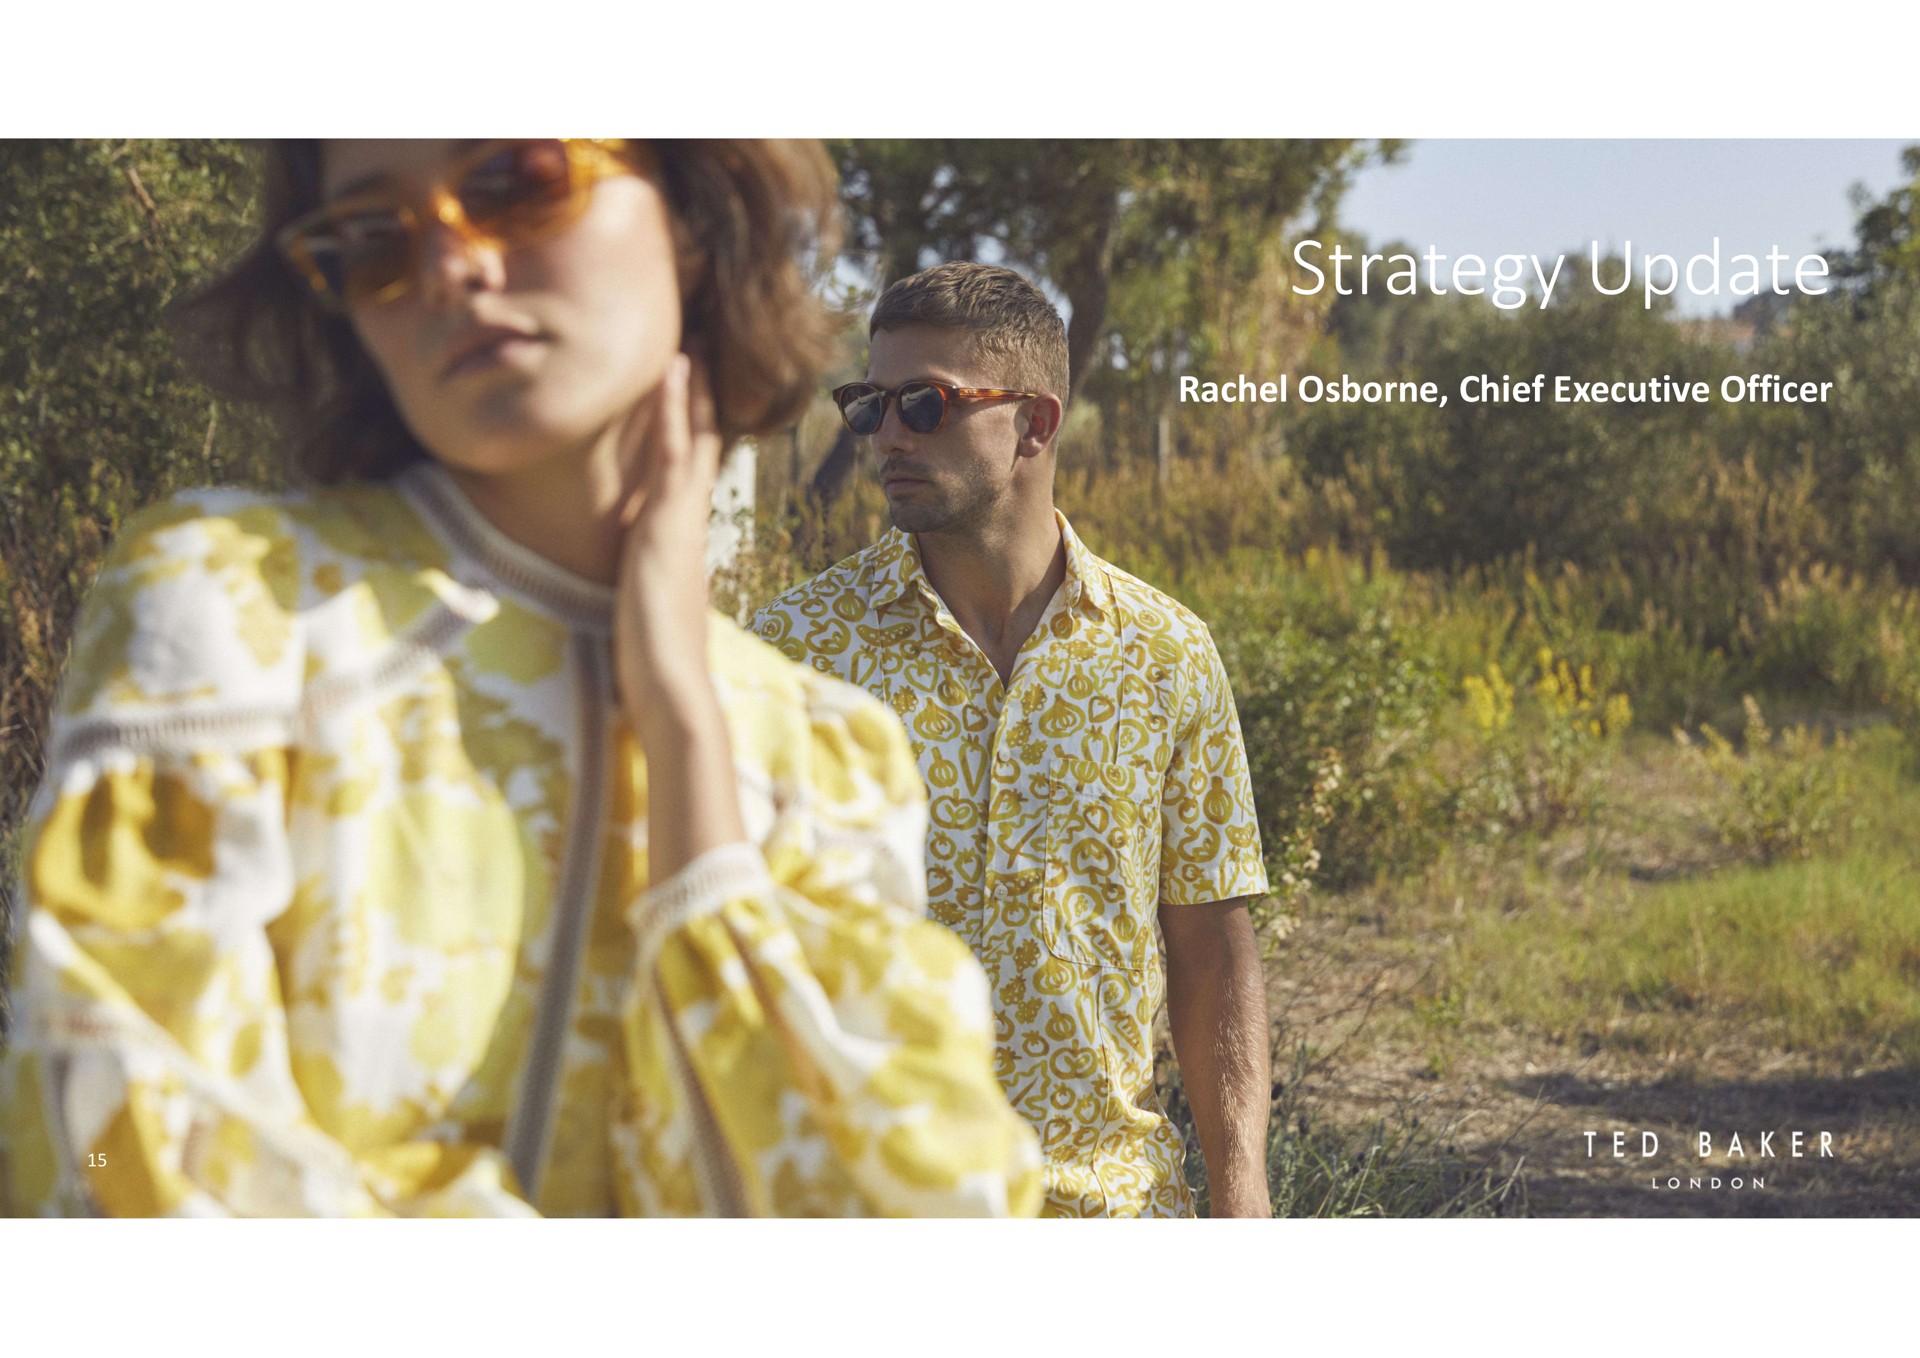 strategy update | Ted Baker